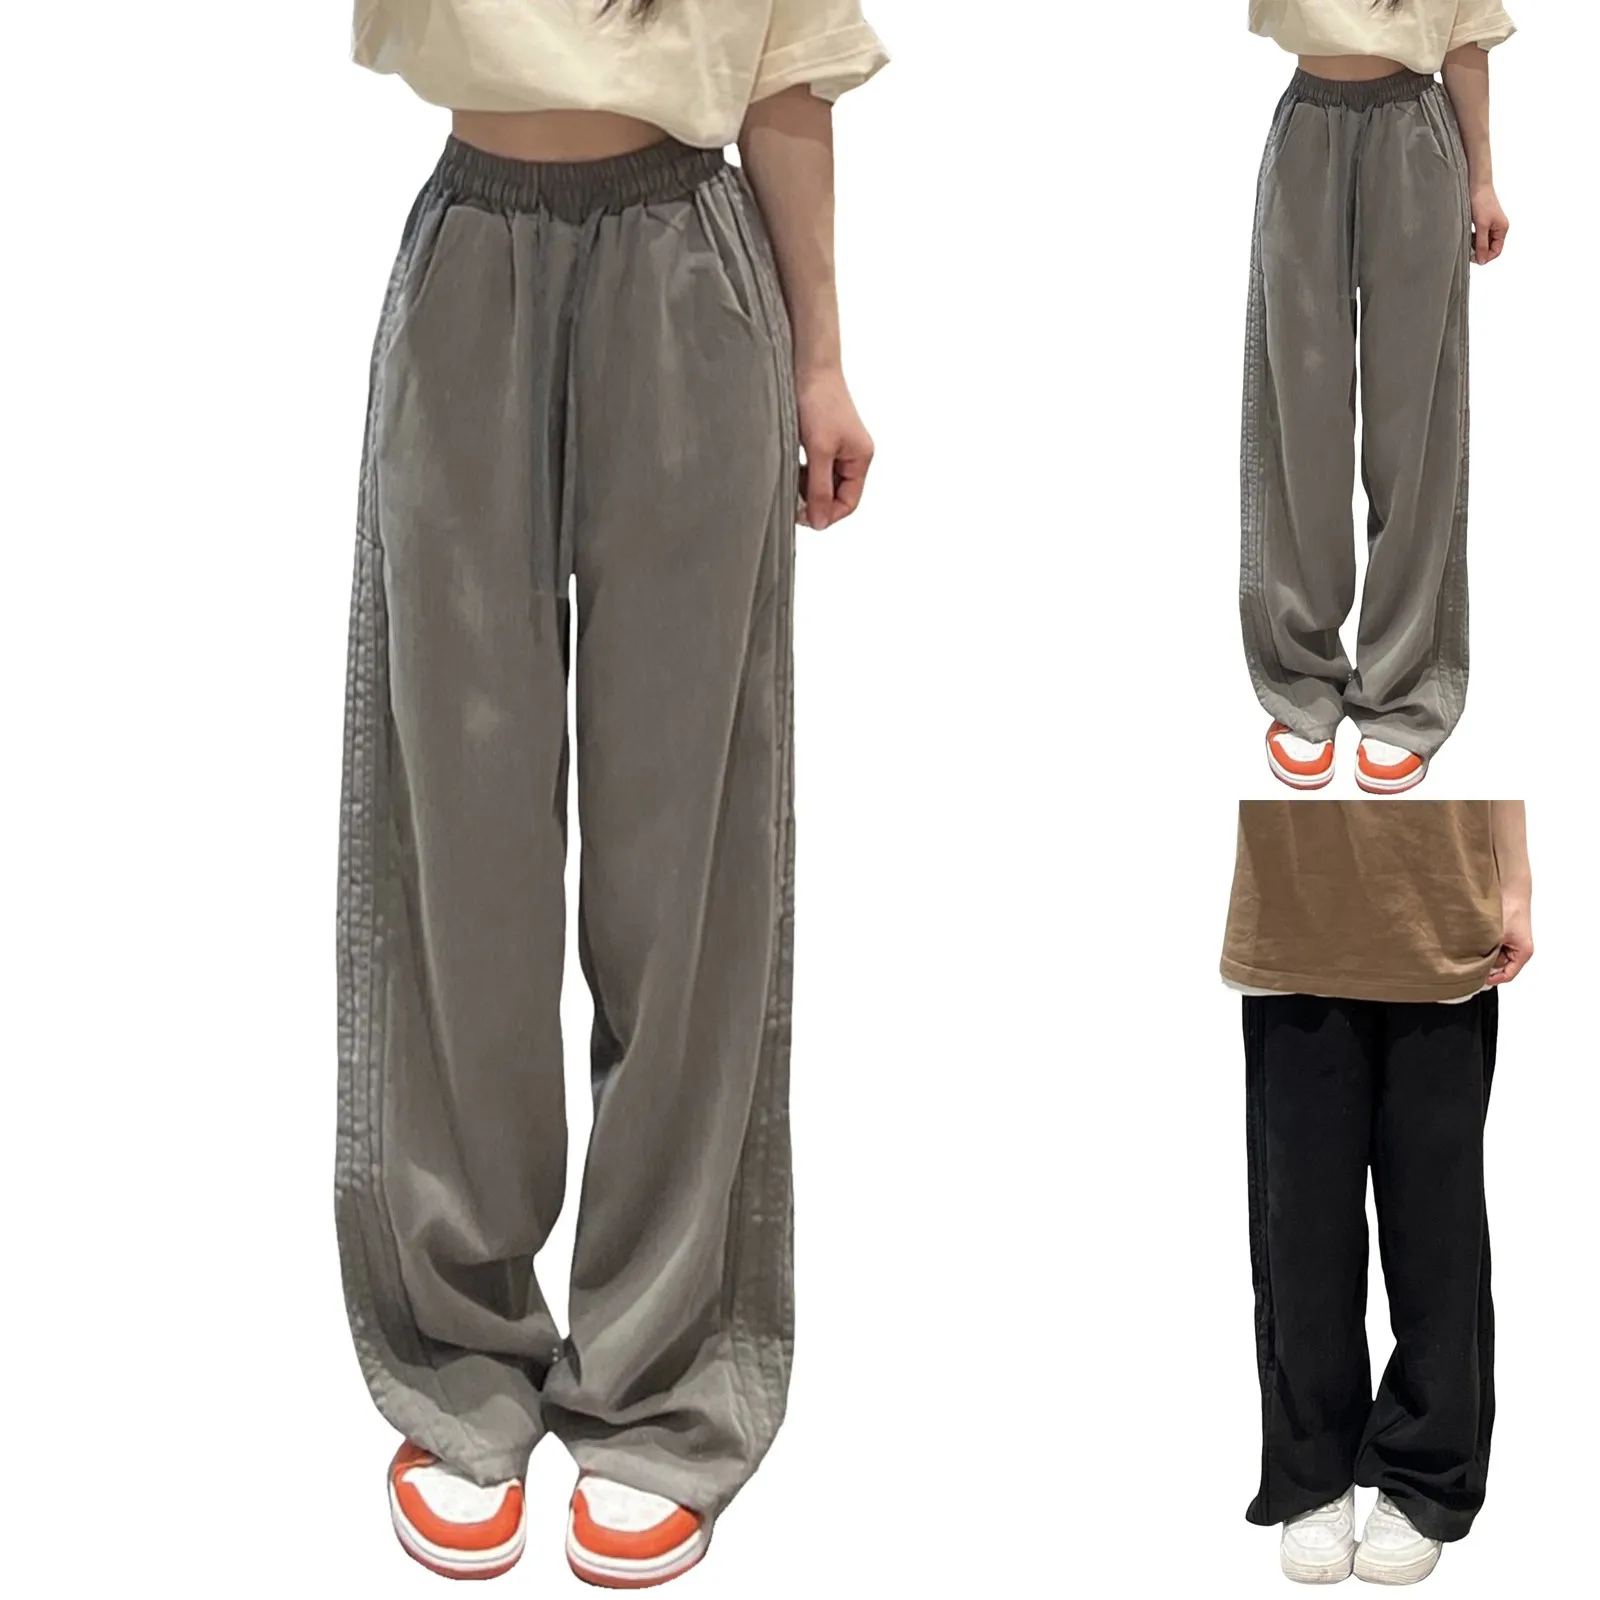 

Women's Long Pants Retro Side Stripes Casual Loose Fitting Flesh Covering Suit Pants Wide Leg High Waist Comfortable Costume